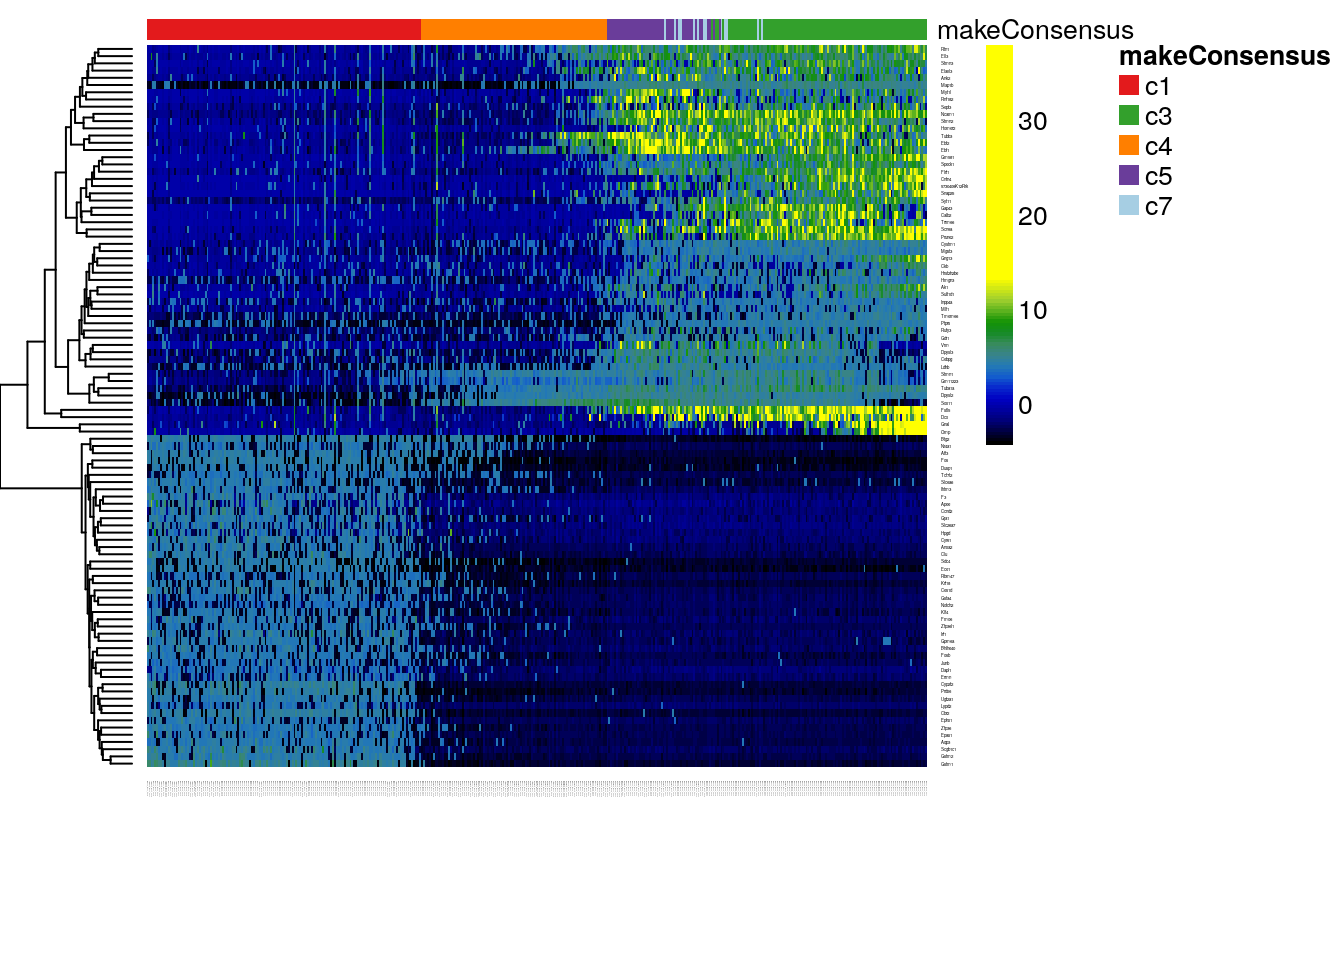 DE: Heatmap of the normalized expression measures for the 100 most significantly DE genes for the neuronal lineage, where rows correspond to genes and columns to cells ordered by pseudotime.